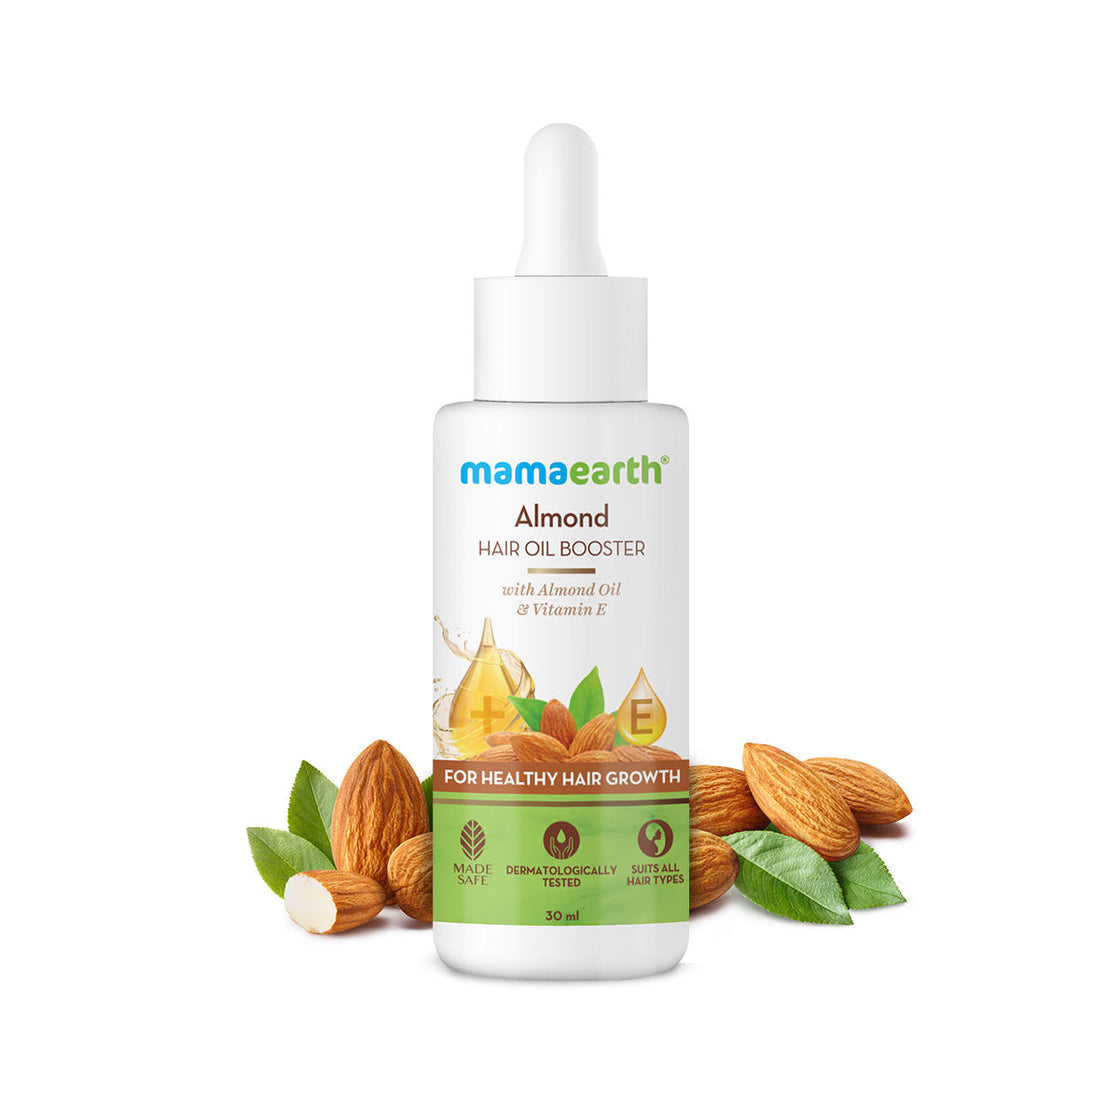 Mamaearth Almond Hair Oil Booster With Almond Oil & Vitamin E & For Healthy Hair Growth-2